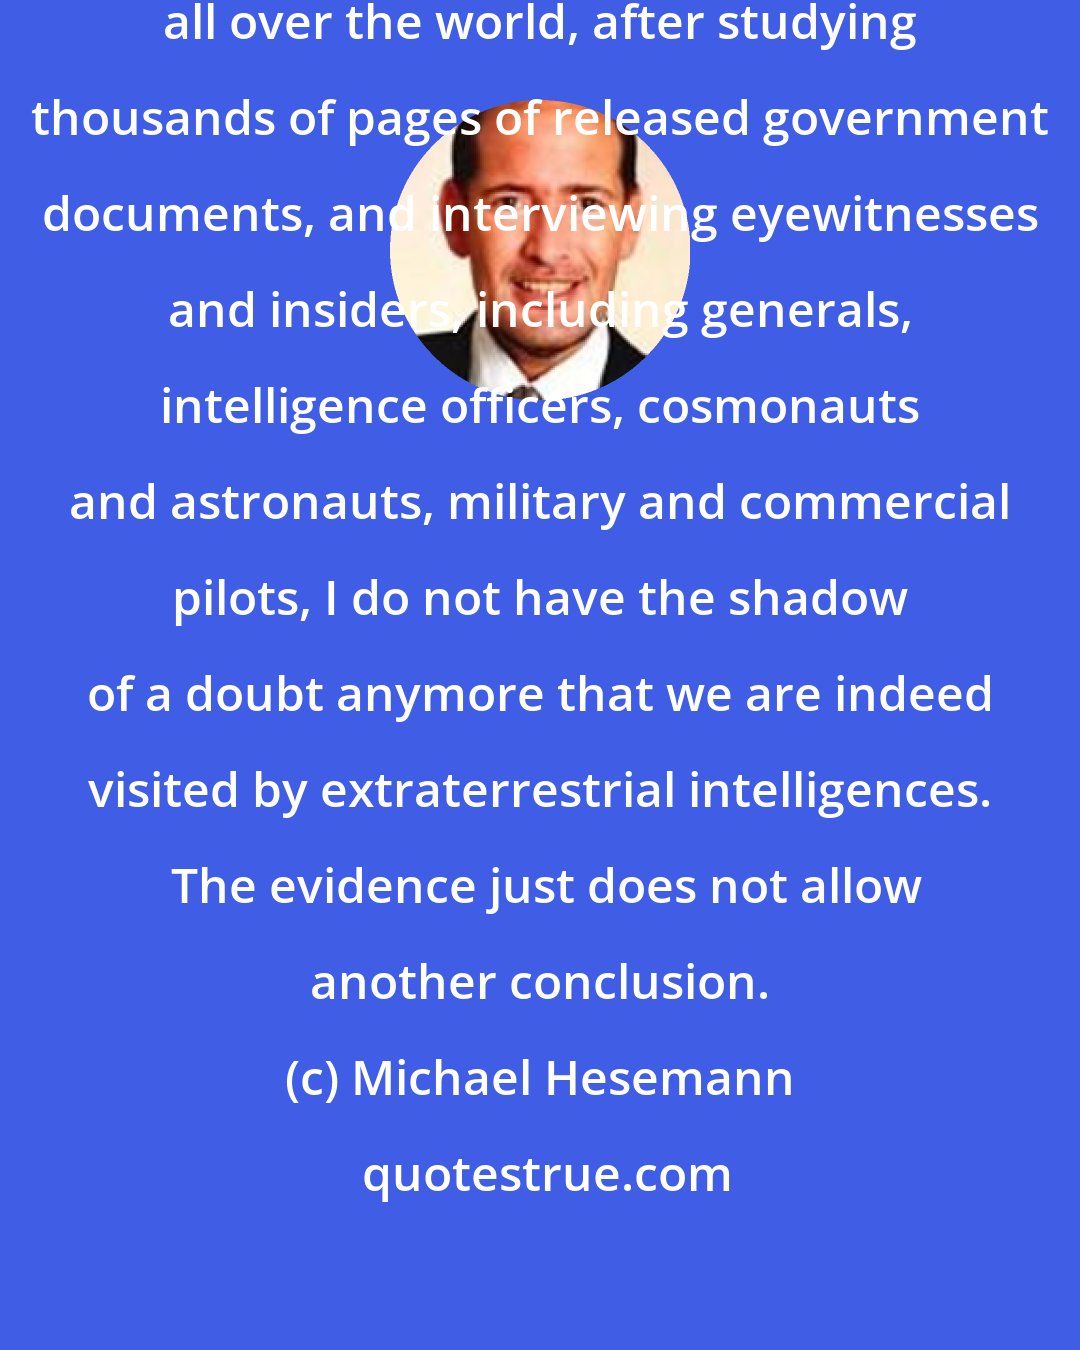 Michael Hesemann: After investigating the UFO phenomenon all over the world, after studying thousands of pages of released government documents, and interviewing eyewitnesses and insiders, including generals, intelligence officers, cosmonauts and astronauts, military and commercial pilots, I do not have the shadow of a doubt anymore that we are indeed visited by extraterrestrial intelligences.  The evidence just does not allow another conclusion.